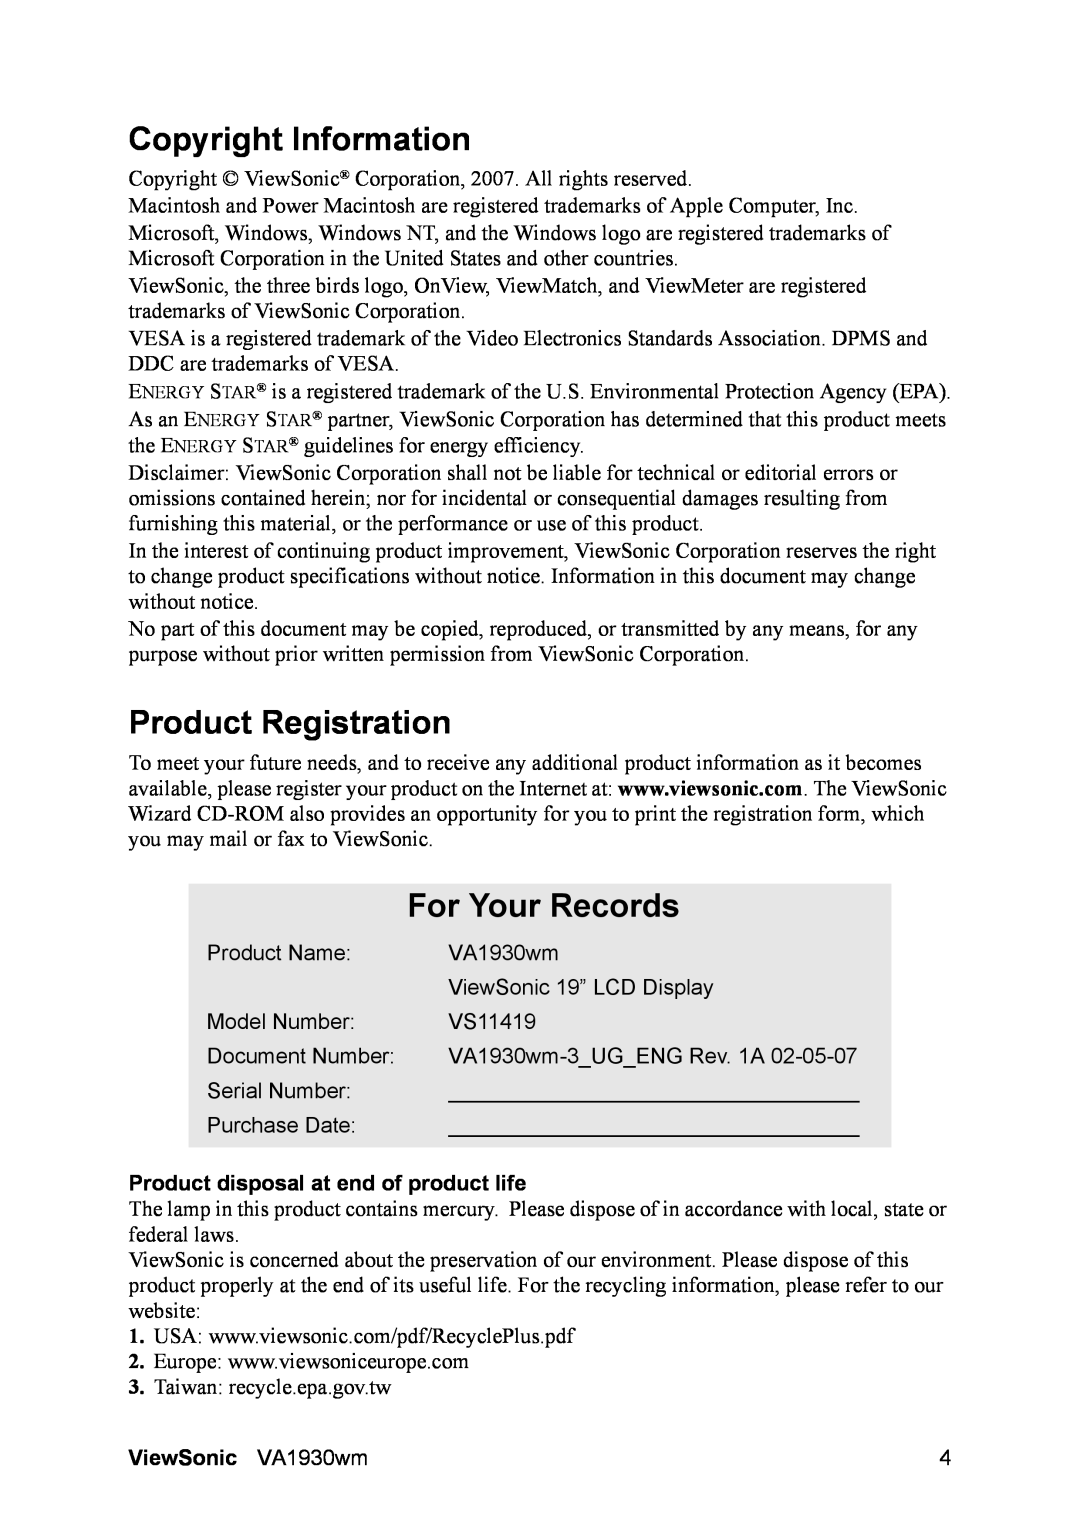 ViewSonic VS11419 Copyright Information, Product Registration, For Your Records, Product disposal at end of product life 